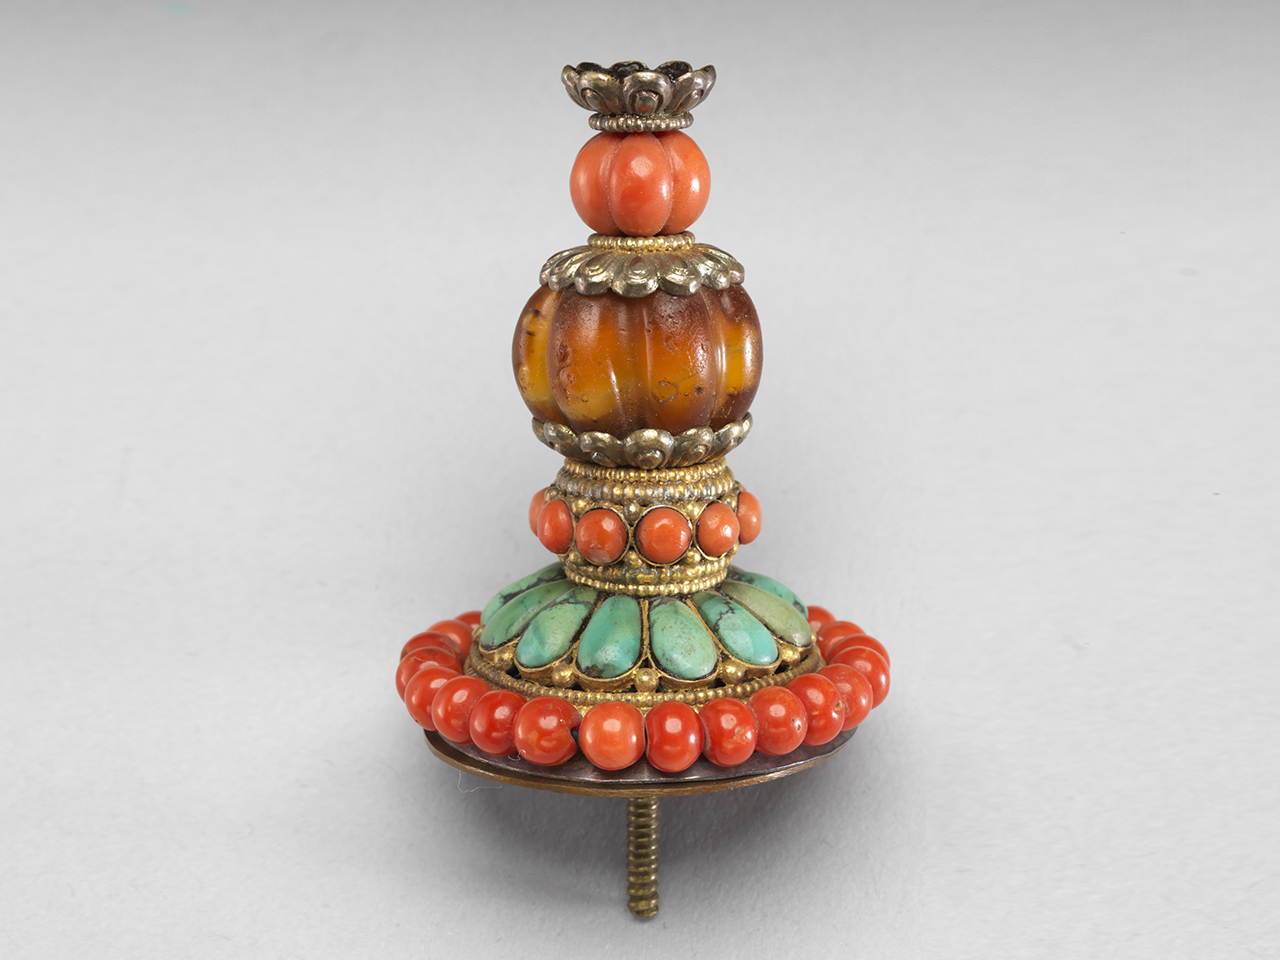 Silver hat finial with coral and turquoise inlay